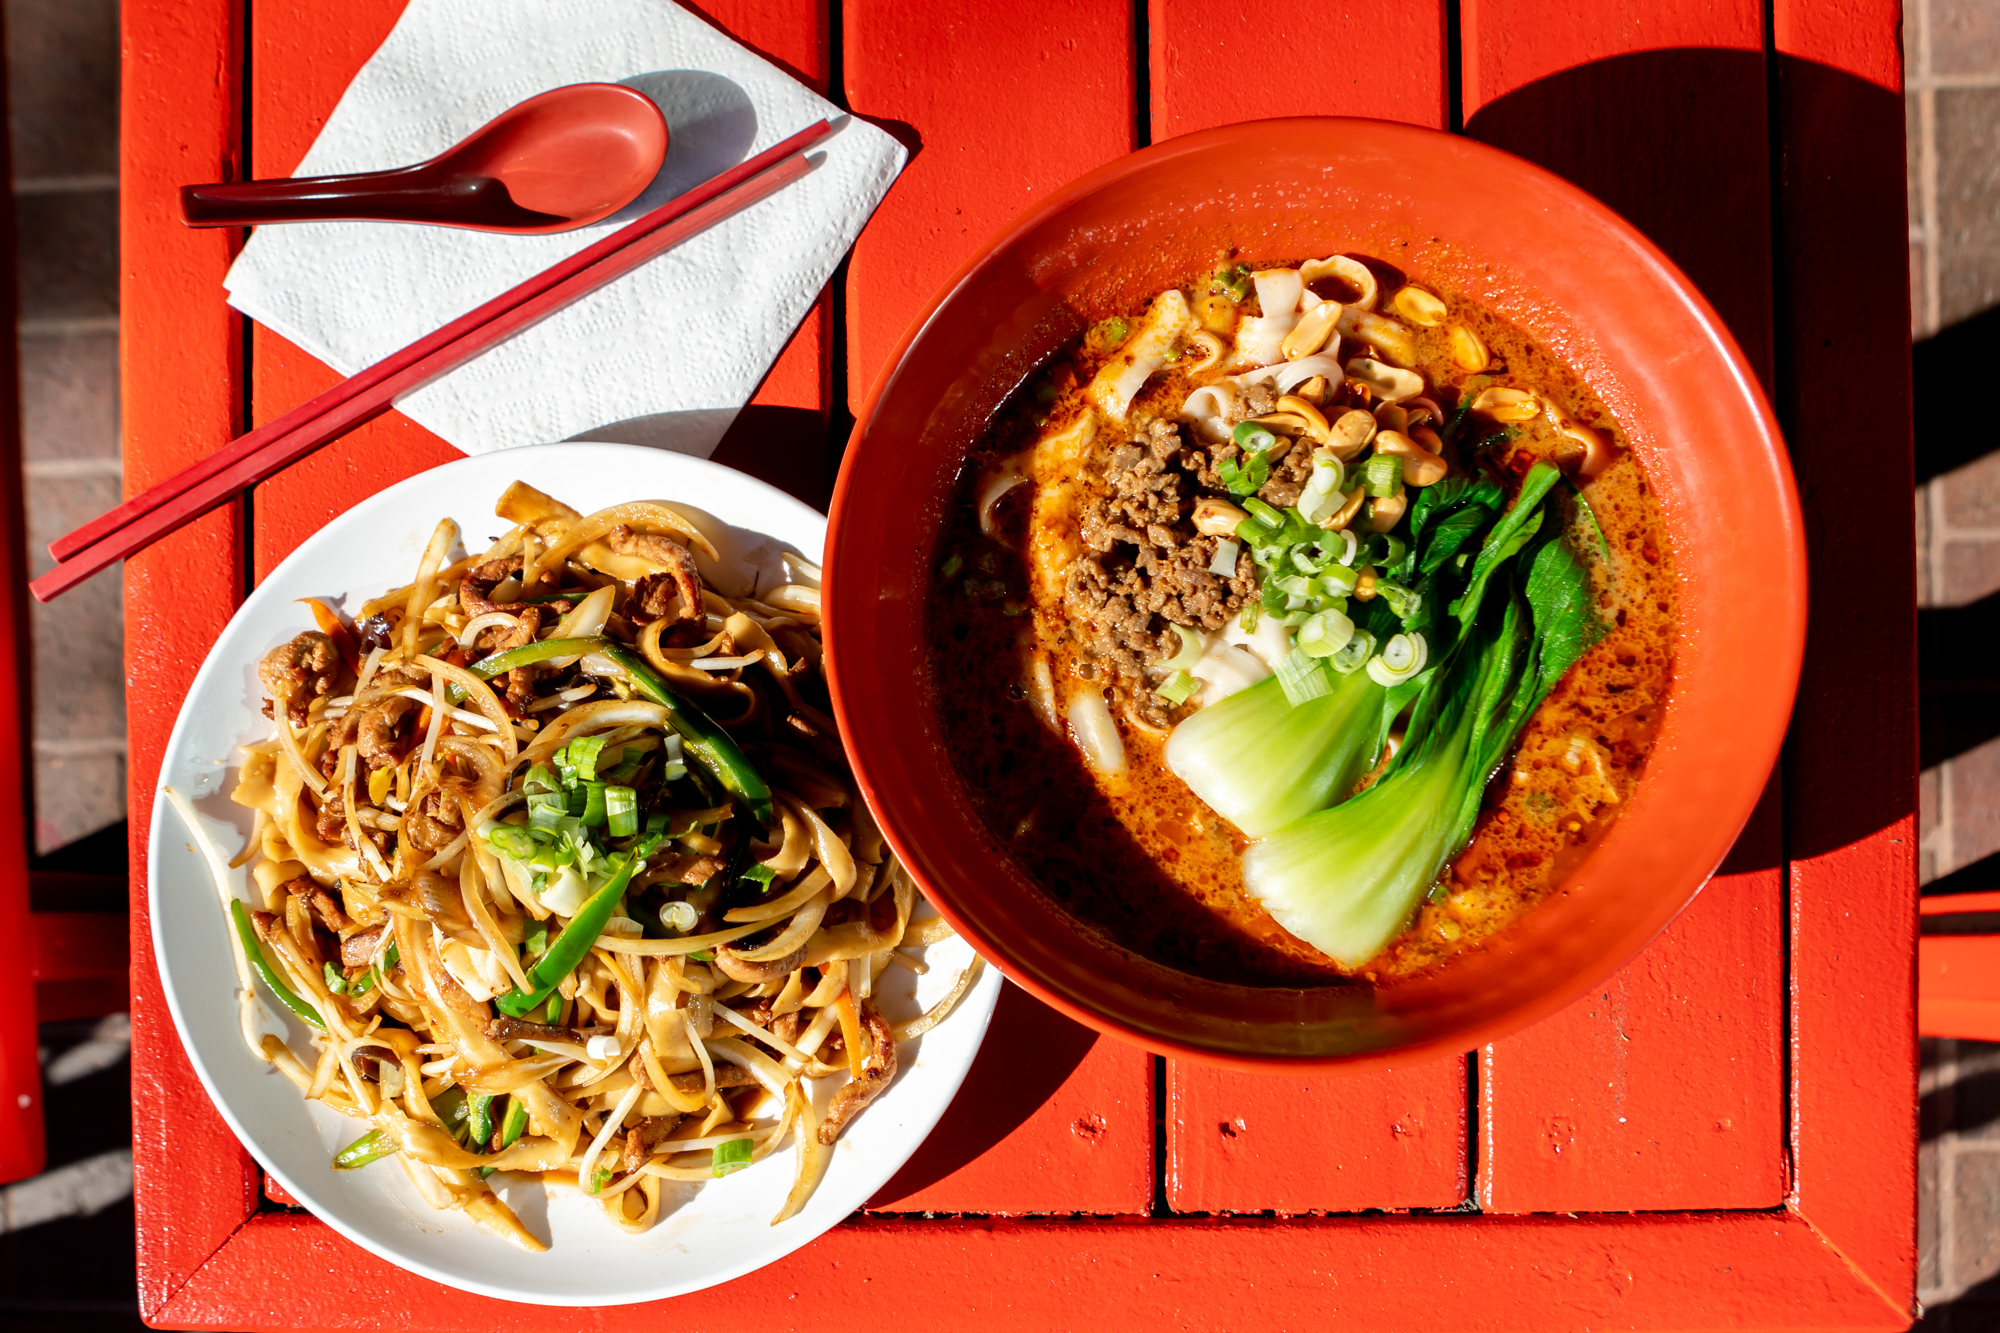 Overhead view of two styles of knife-cut noodles, one dry and the other in a bowl of broth